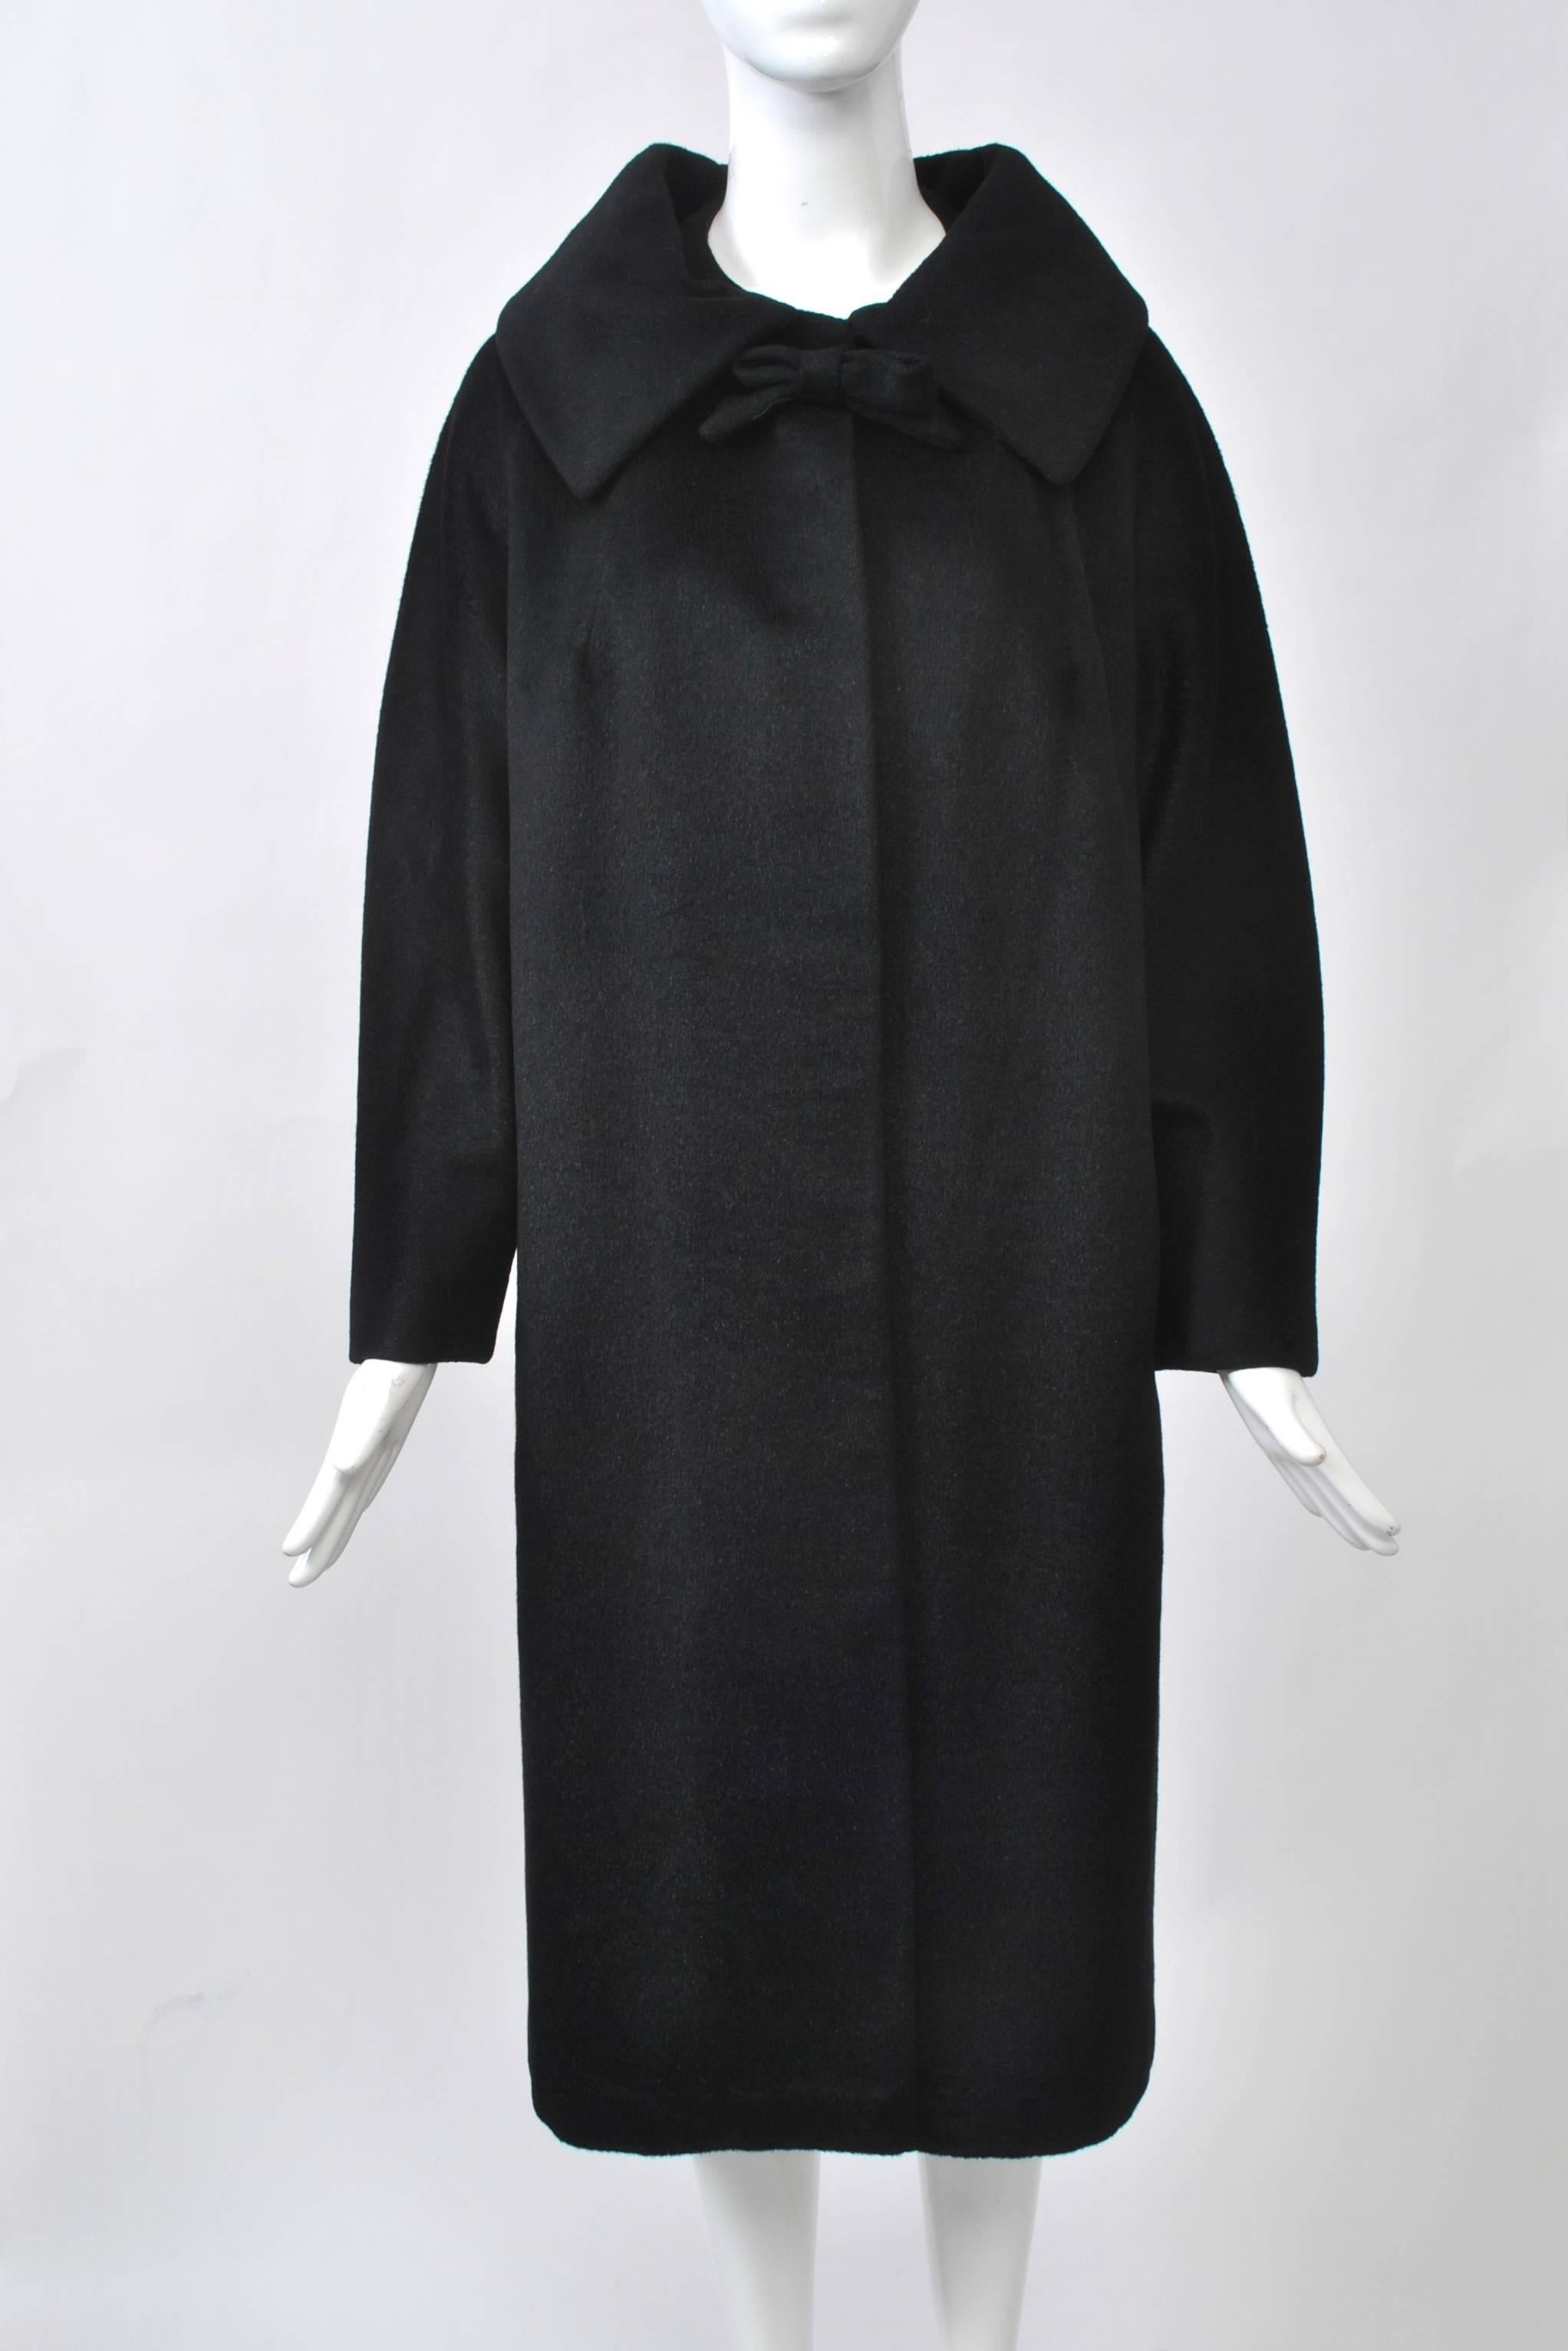 Lilli Ann coat and suits were some of the most stylish produced in America during the mid twentieth century. This example features one of their hallmark fabrics, a Blin & Blin blend with nap and sheen that is smooth to the touch. The coat falls